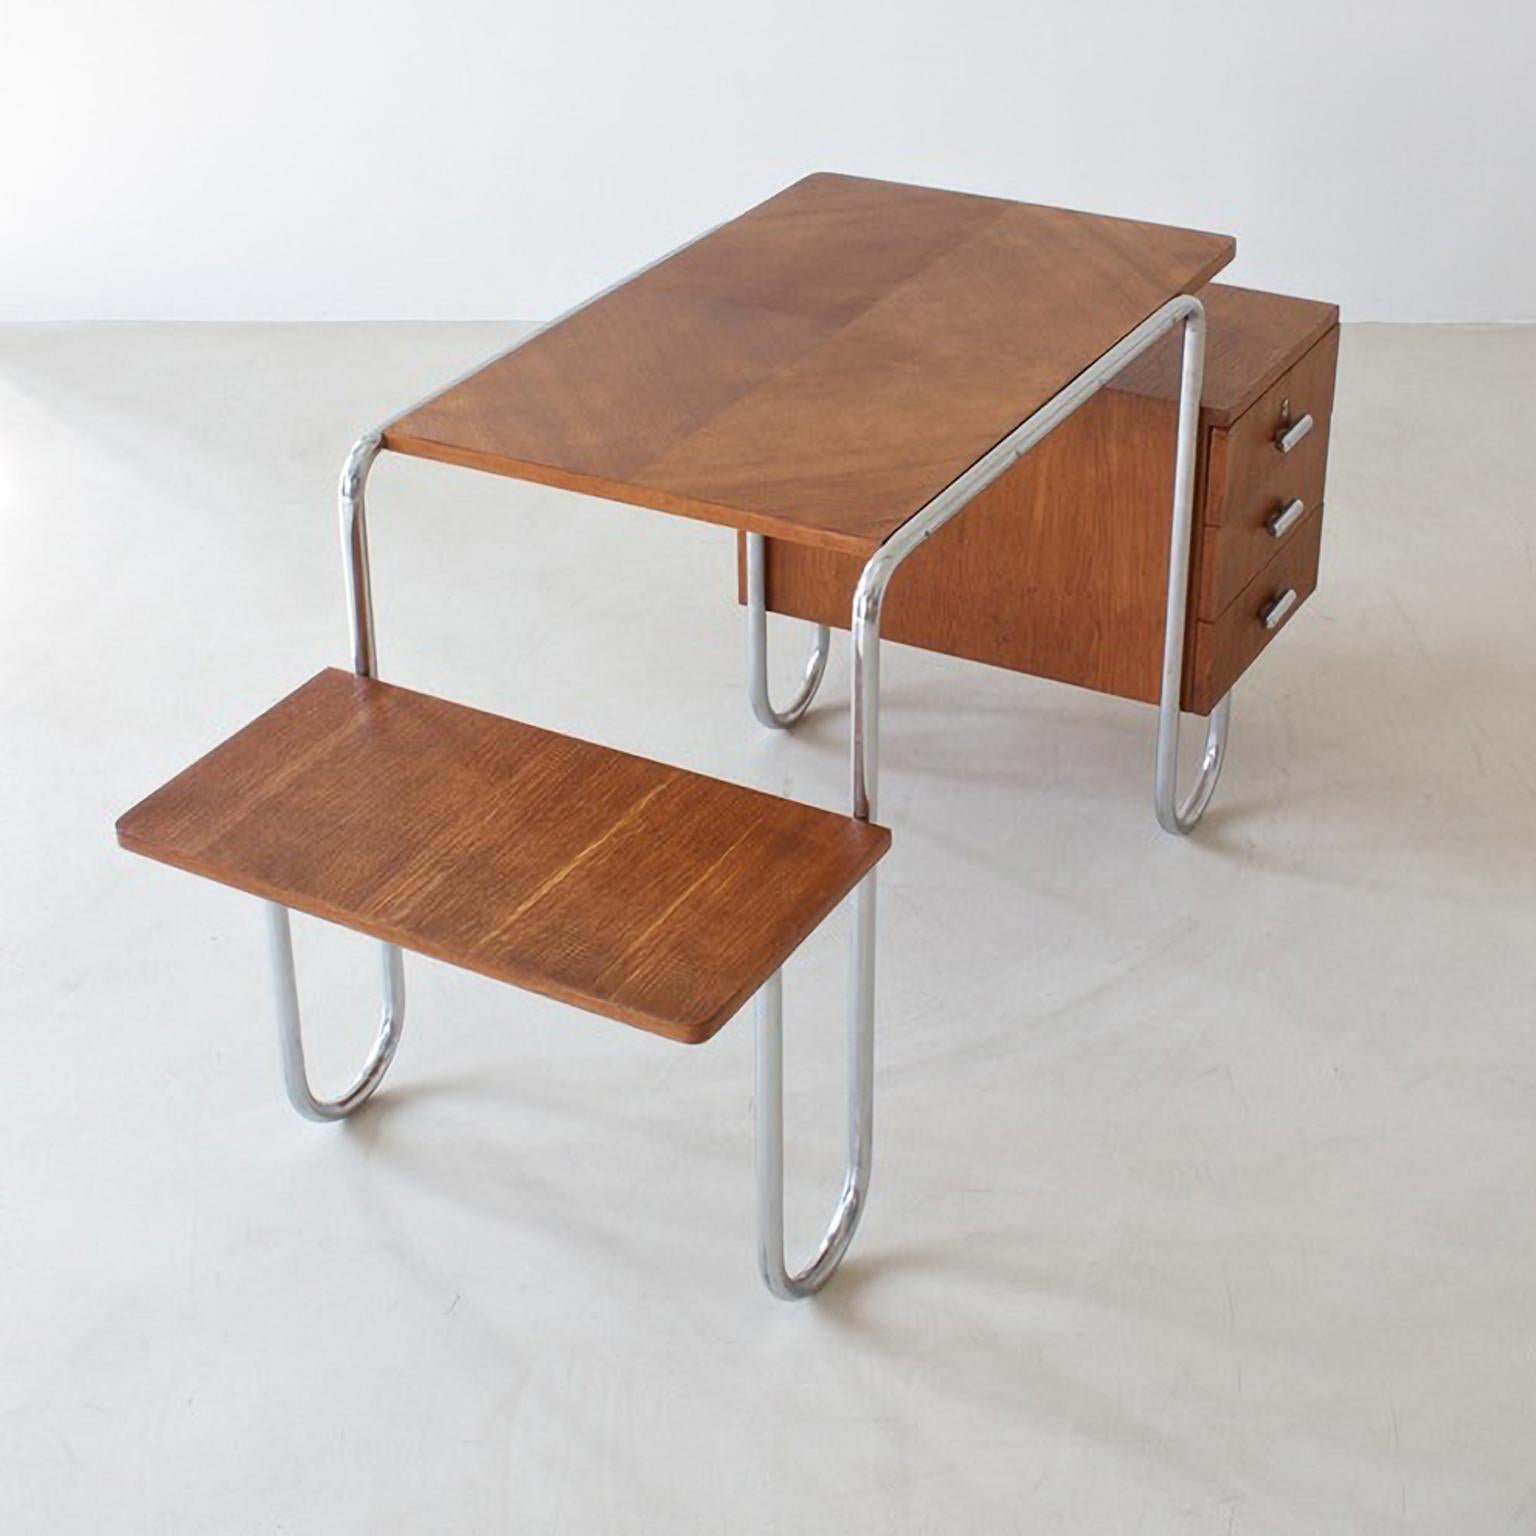 Metal Bauhaus Tubular Steel Desk by André Lurçat, Manufactured by Thonet, circa. 1935 For Sale